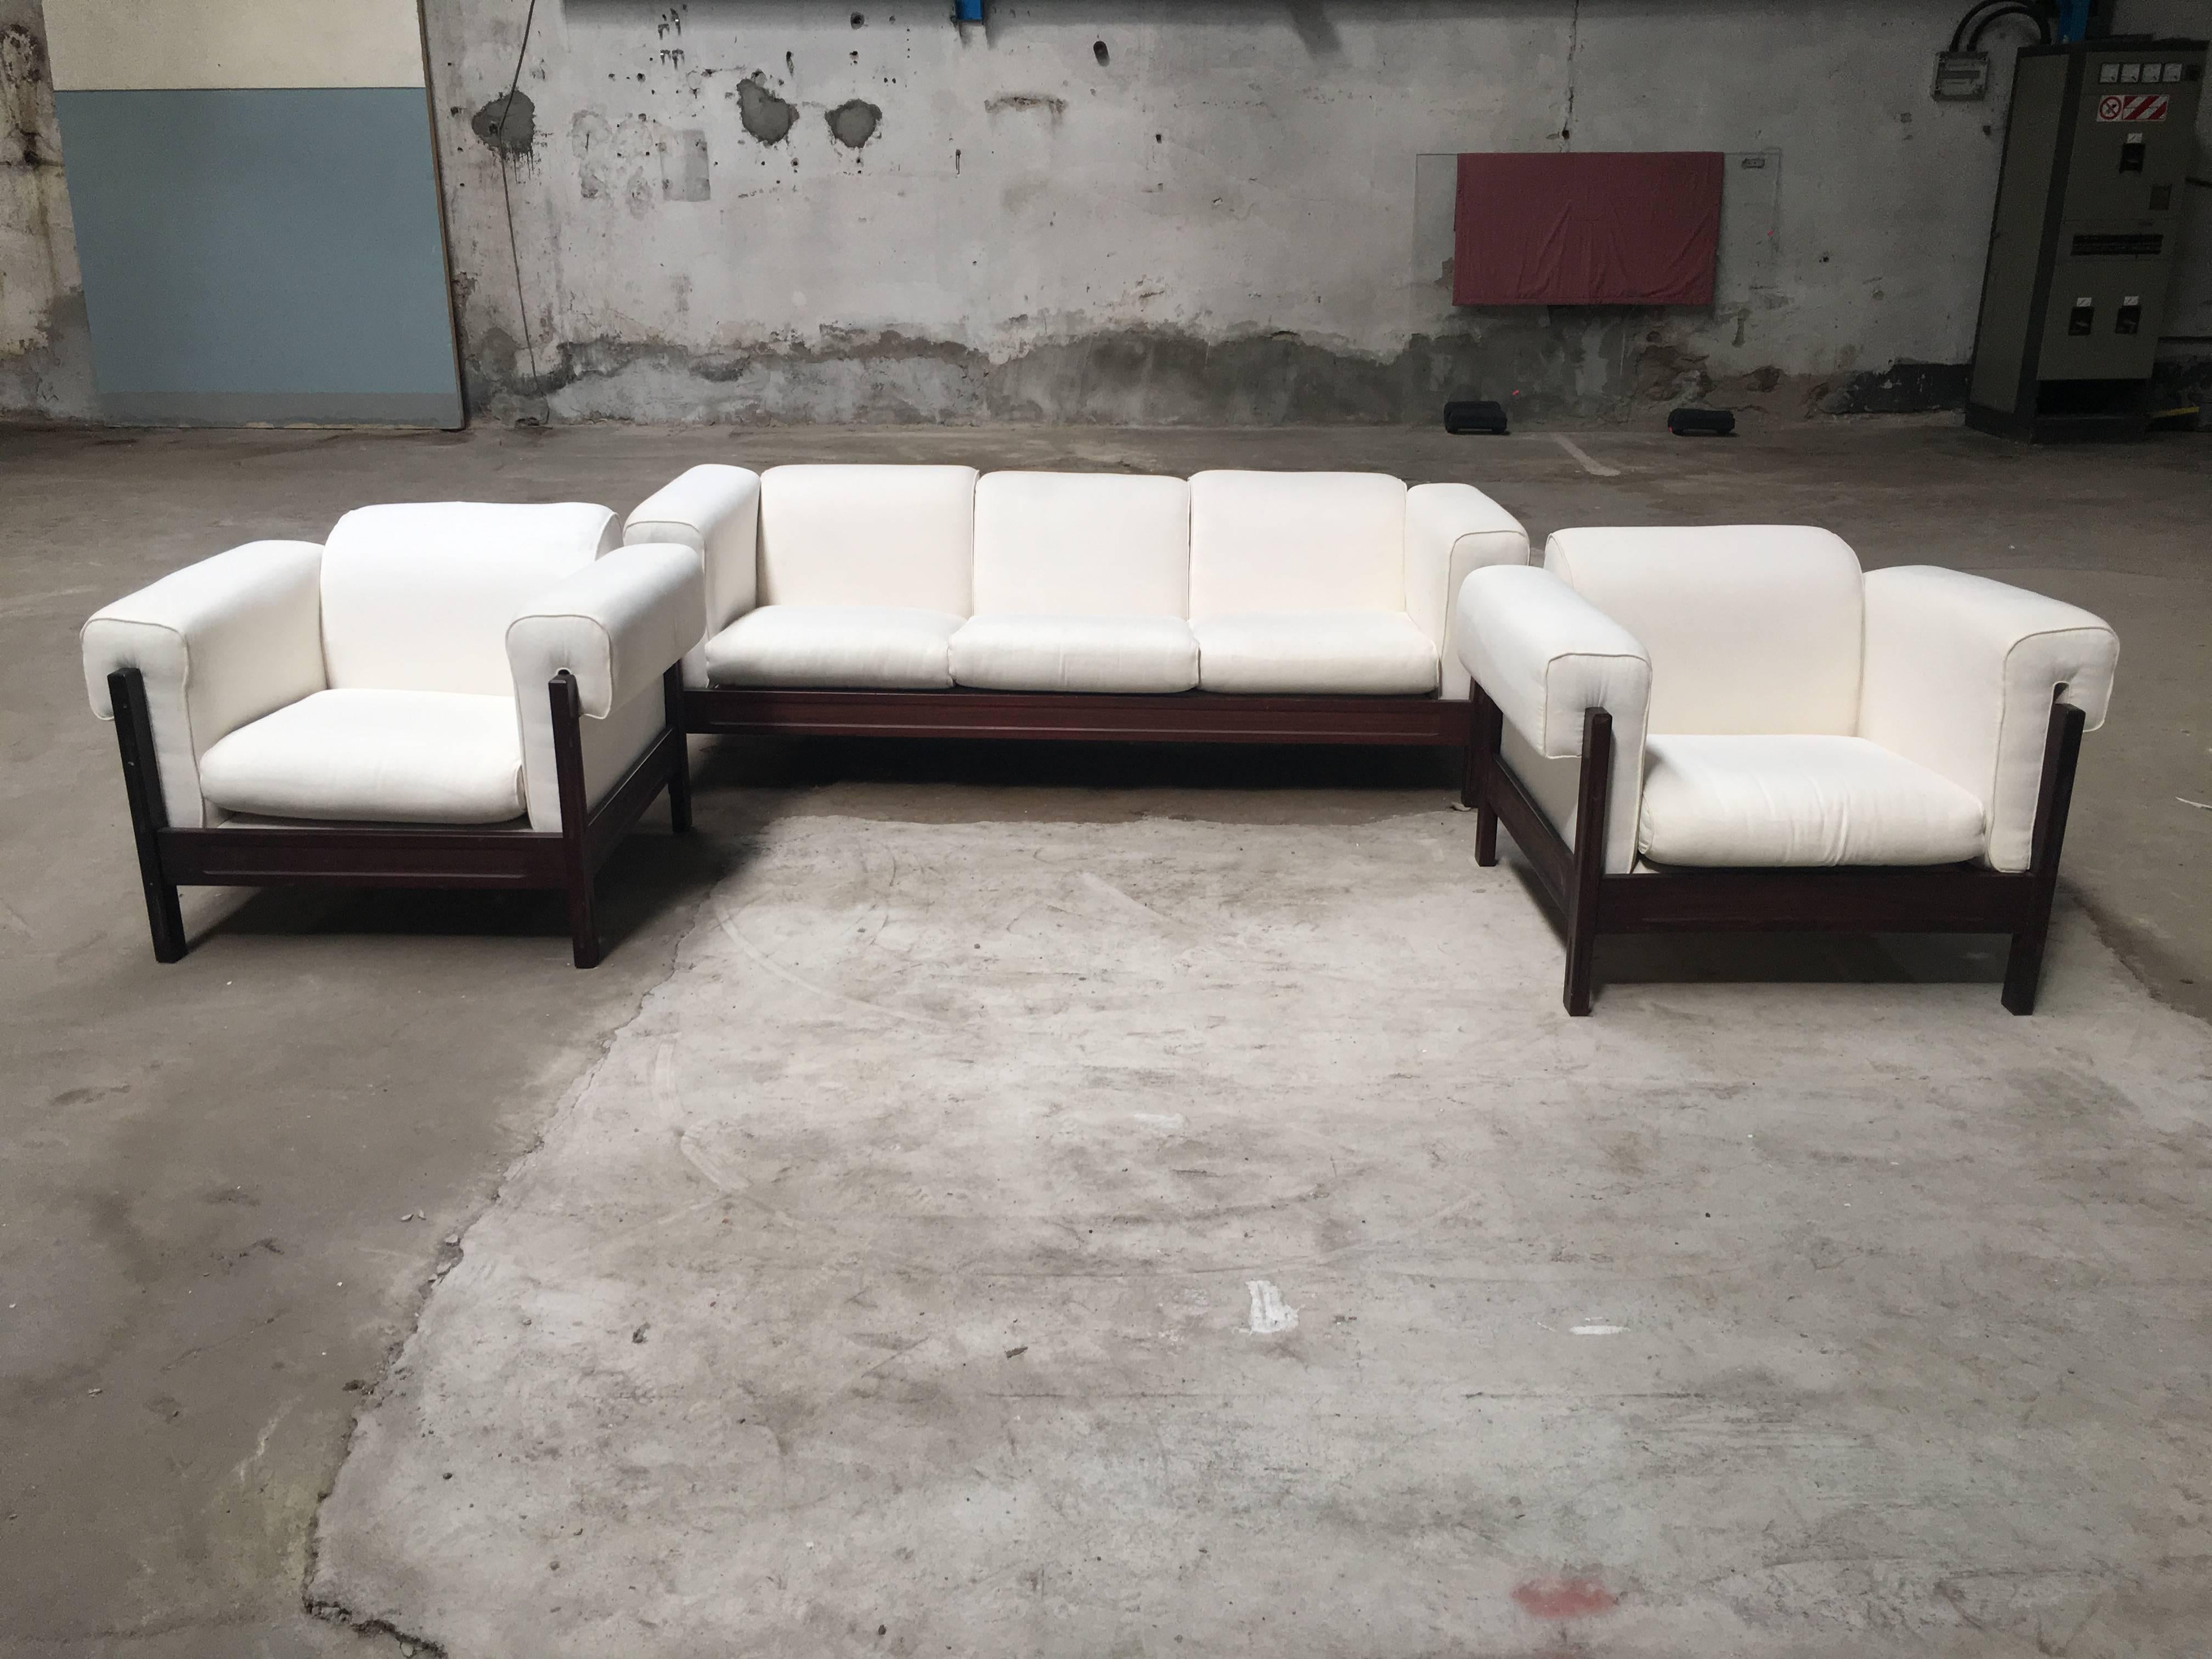 Mid-Century Modern Italian set composed of a three-seat sofa and a pair of armchairs. 
The structure of this set is in hard mahogany wood.
The set is in perfect conditions with its original vintage white cushions.

Measurements:
Sofa: Width